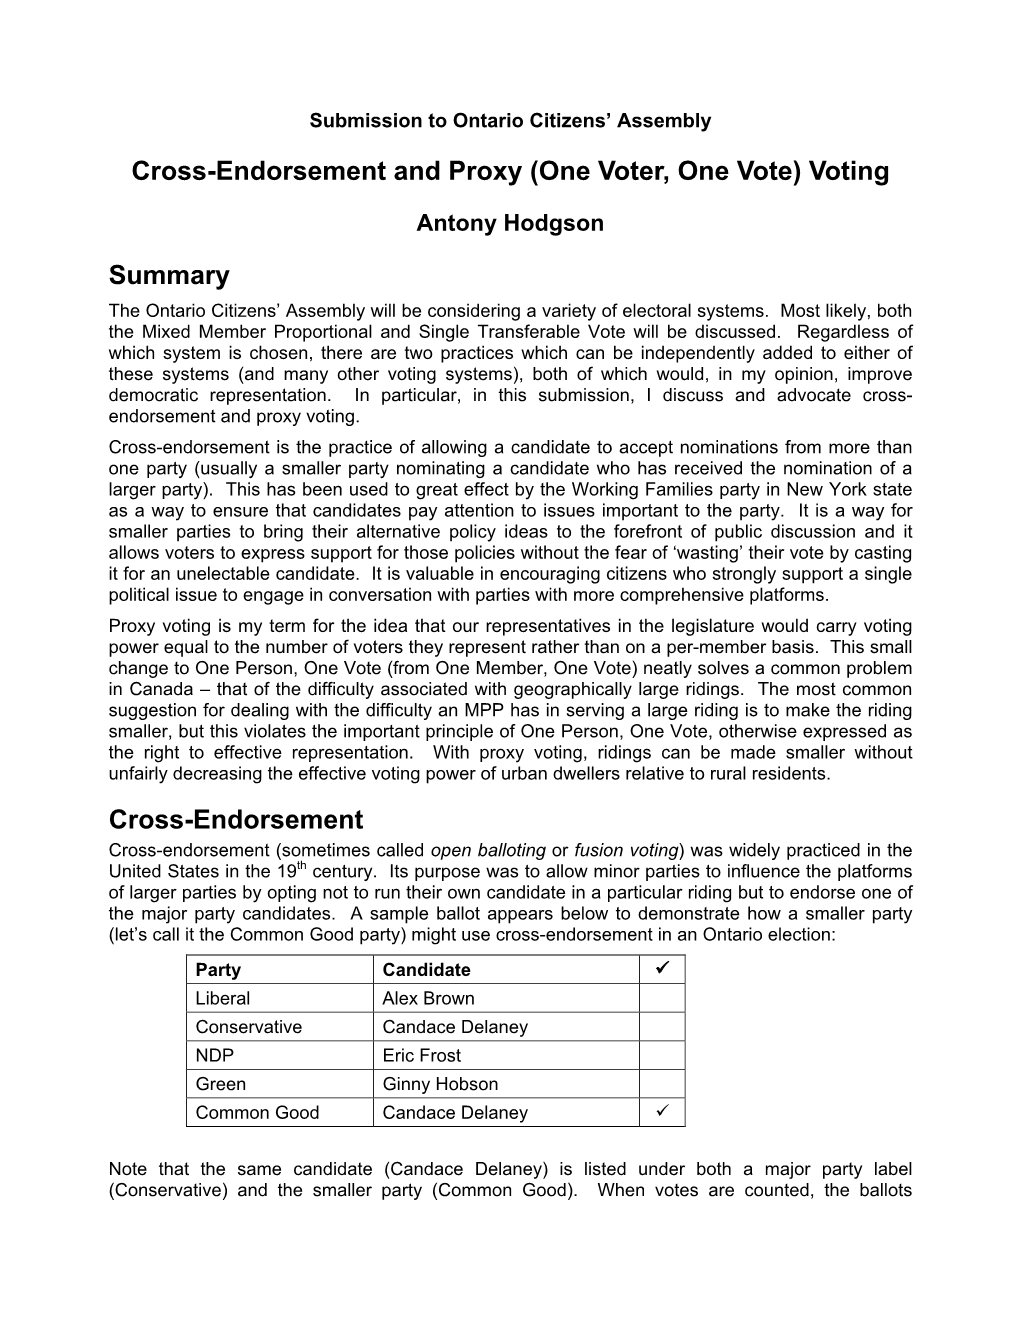 Cross-Endorsement and Proxy (One Voter, One Vote) Voting